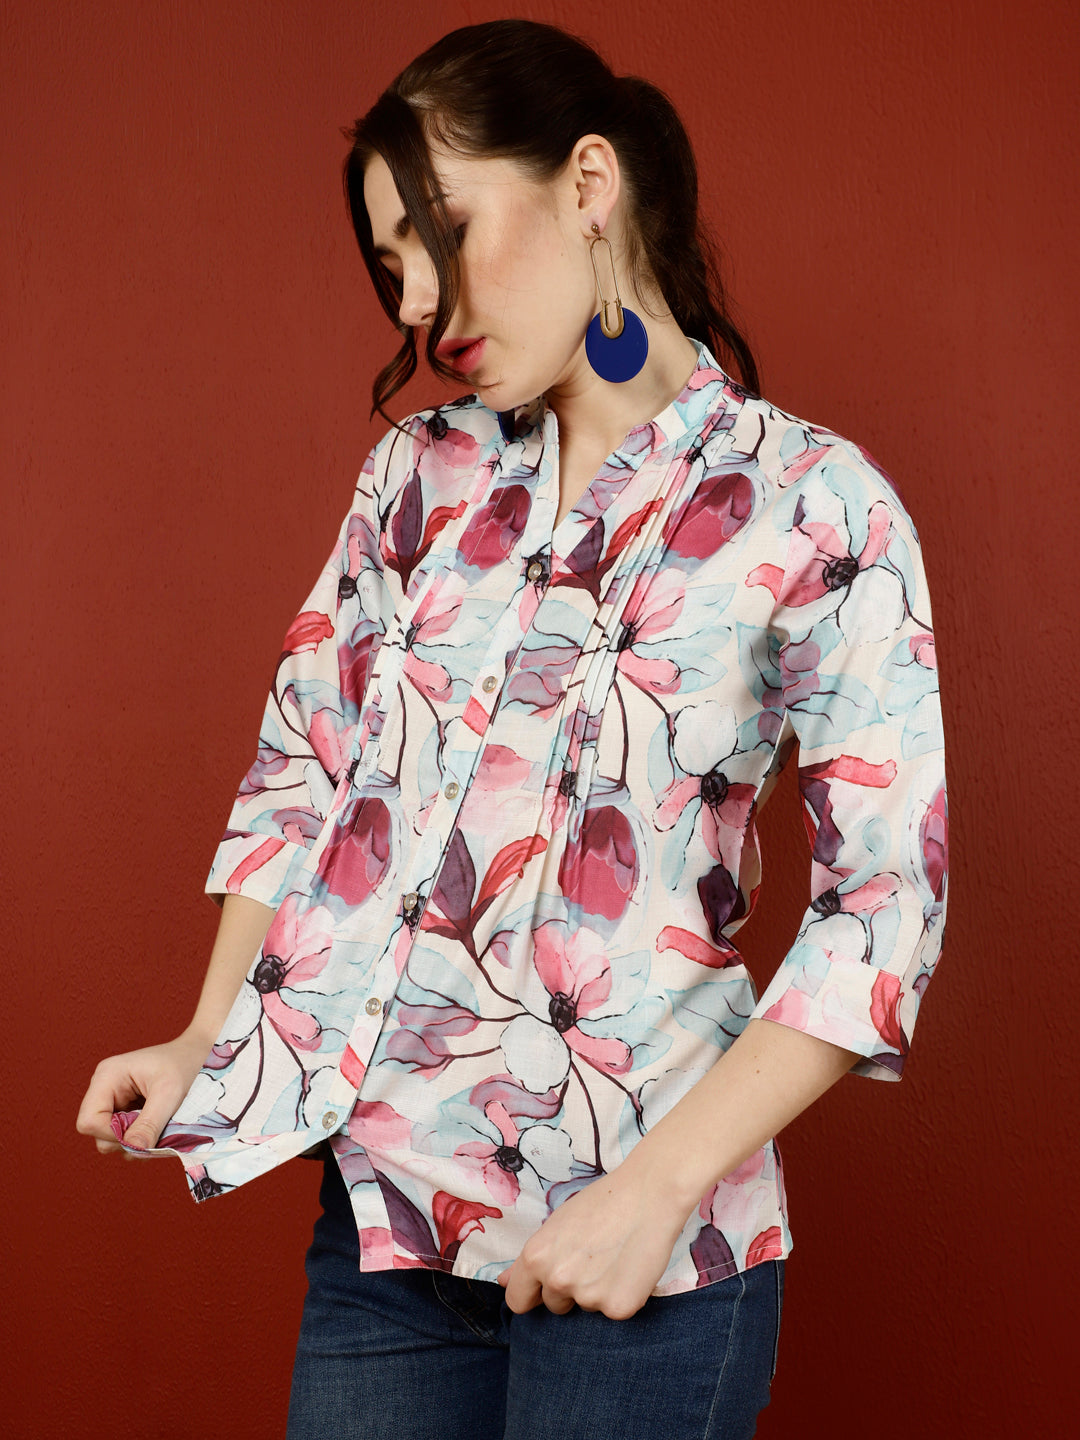 Off-White & Magenta Floral Pleated Top